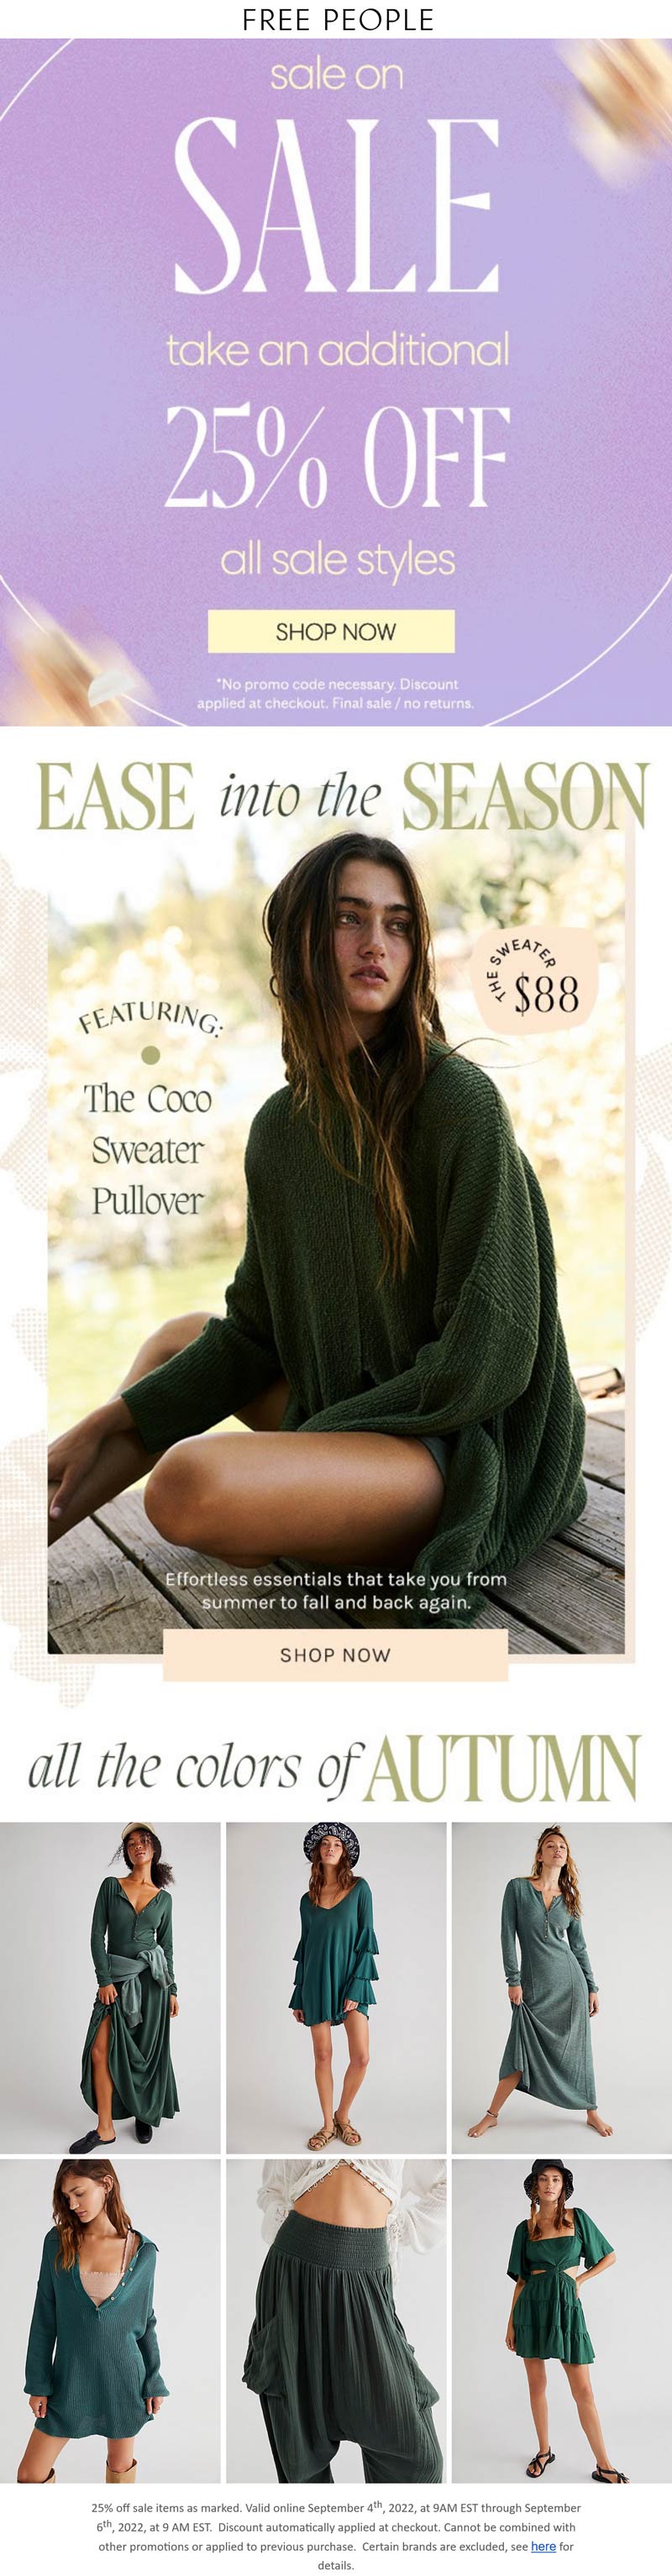 Free People stores Coupon  Extra 25% off sale styles at Free People #freepeople 